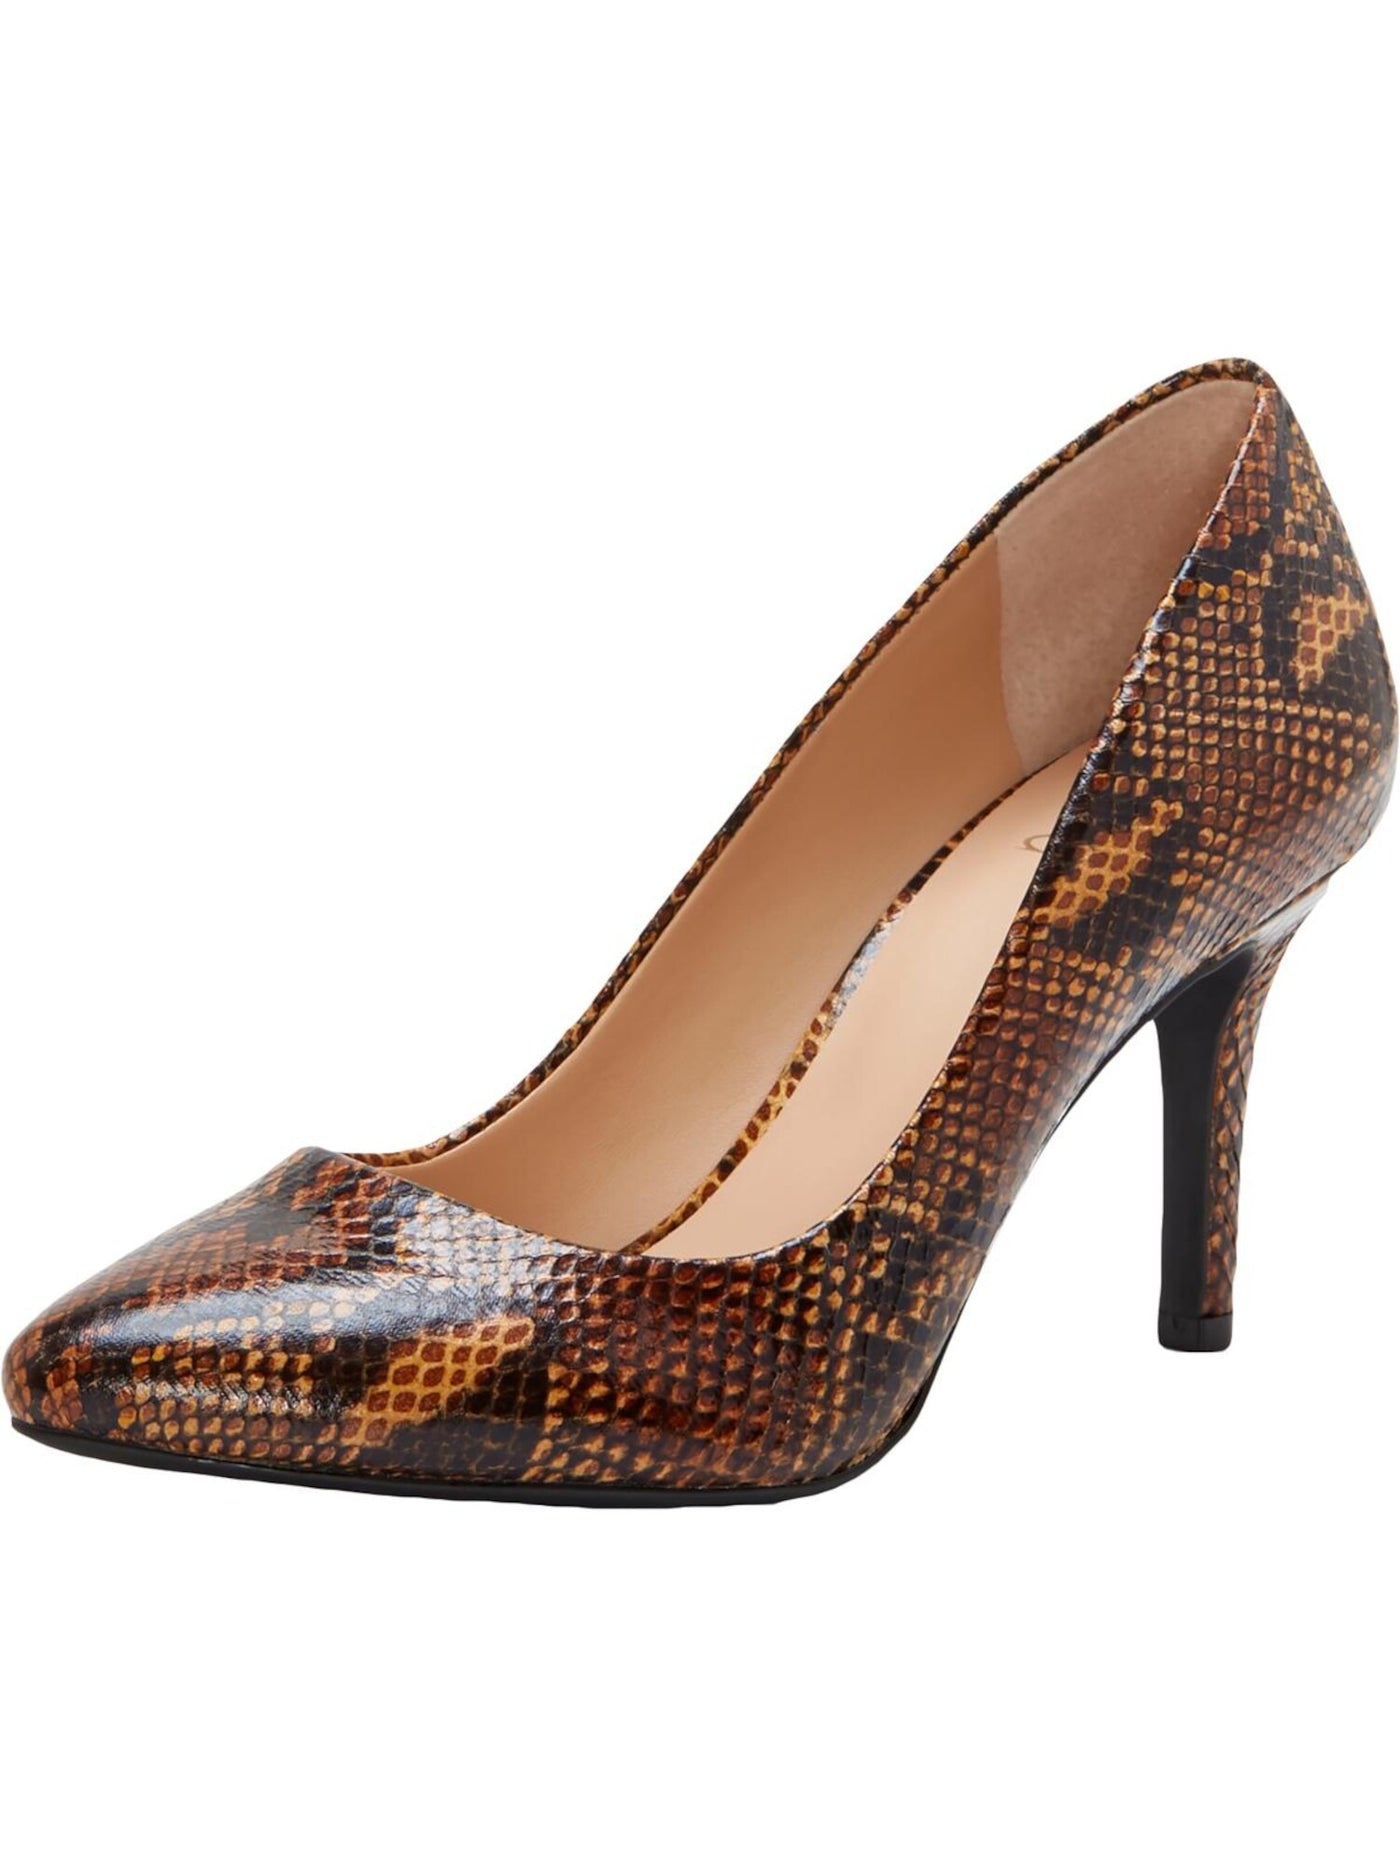 INC Womens Brown Snakeskin Comfort Zitah Pointed Toe Stiletto Slip On Pumps Shoes 9 M